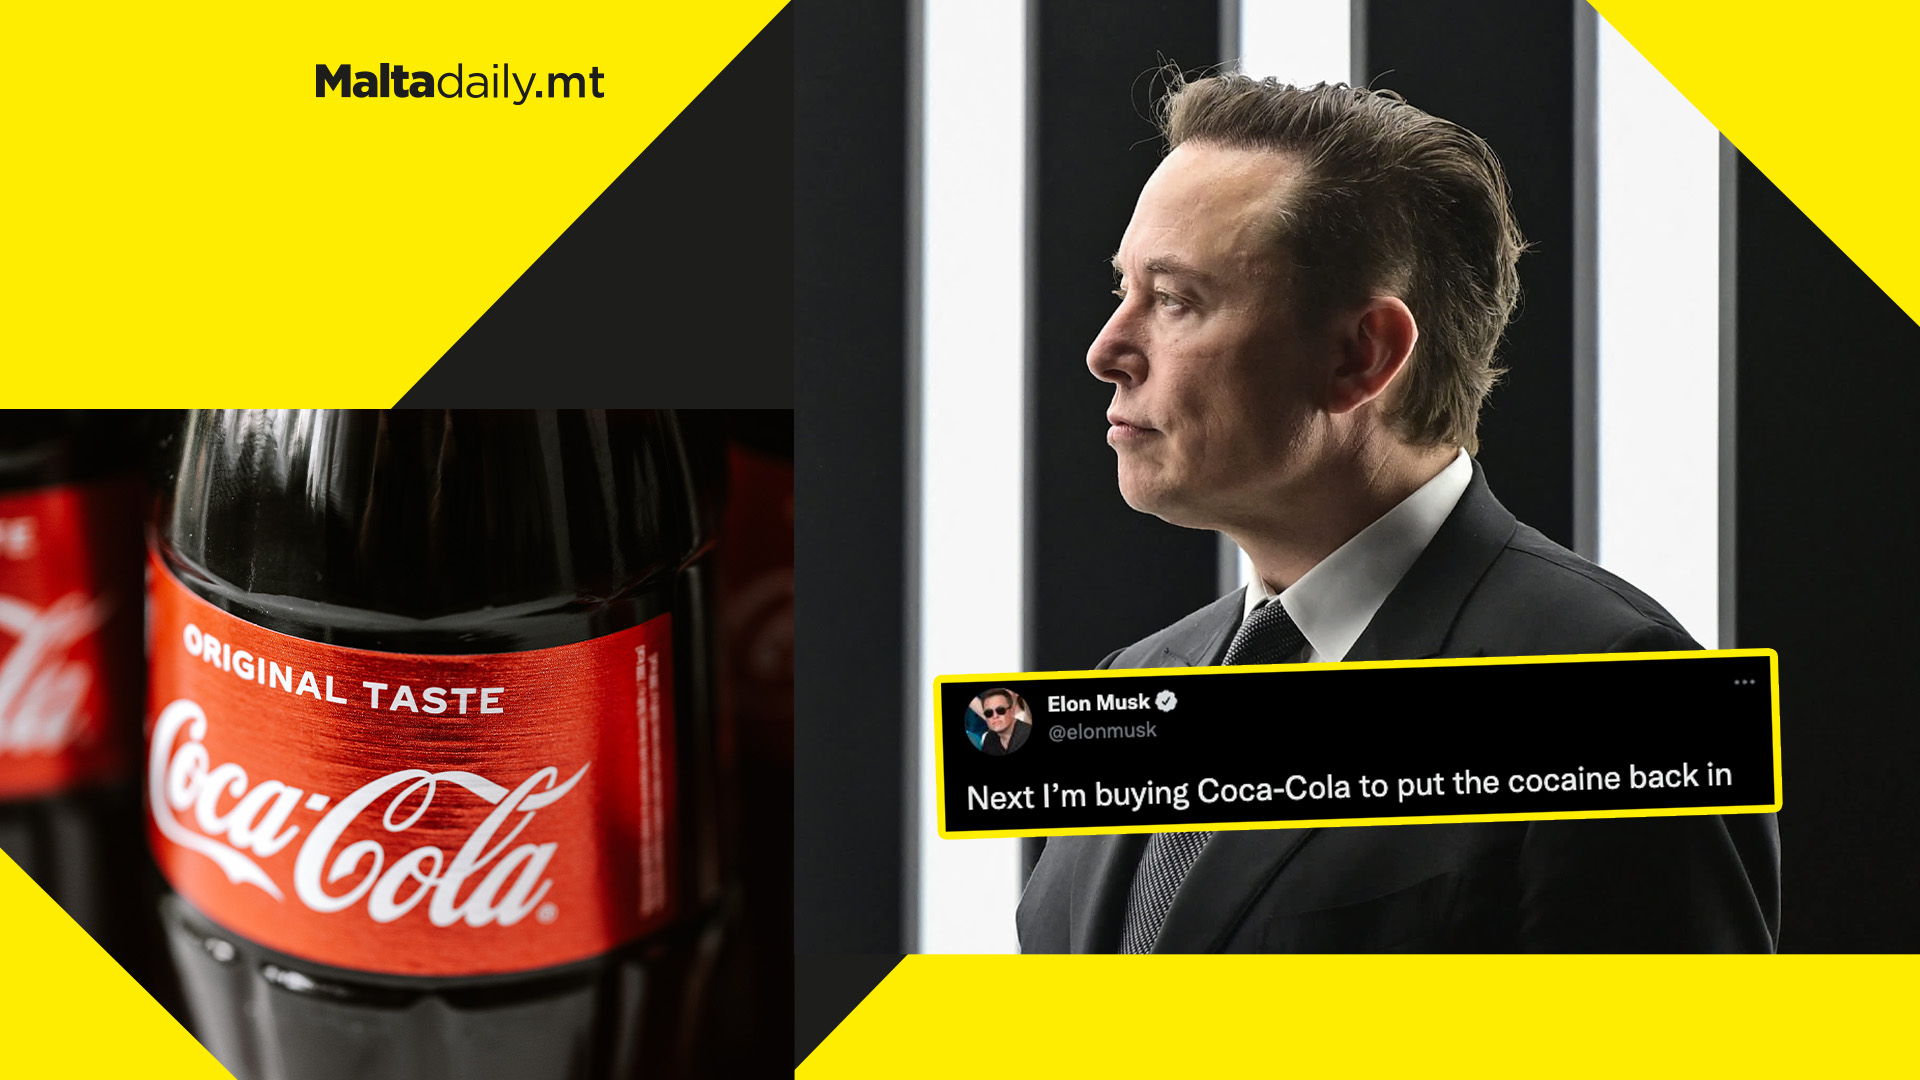 "Next I’m buying Coca-Cola to put the cocaine back in"; Elon Musk tweet goes viral